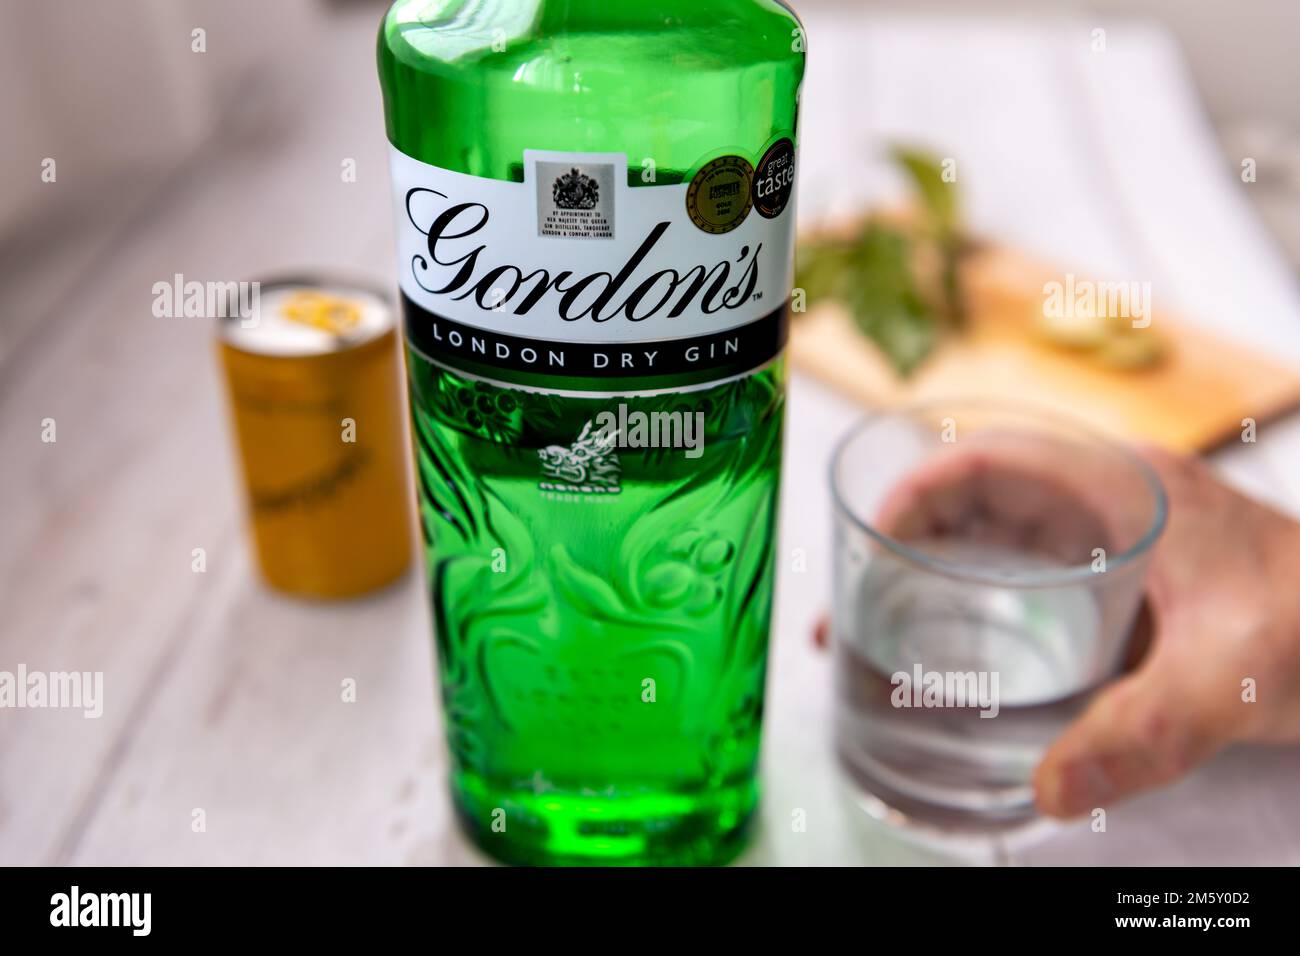 London. UK- 12.31.2022. A bottle of Gordon's London Dry Gin which usually goes with tonic water and lemon. Stock Photo